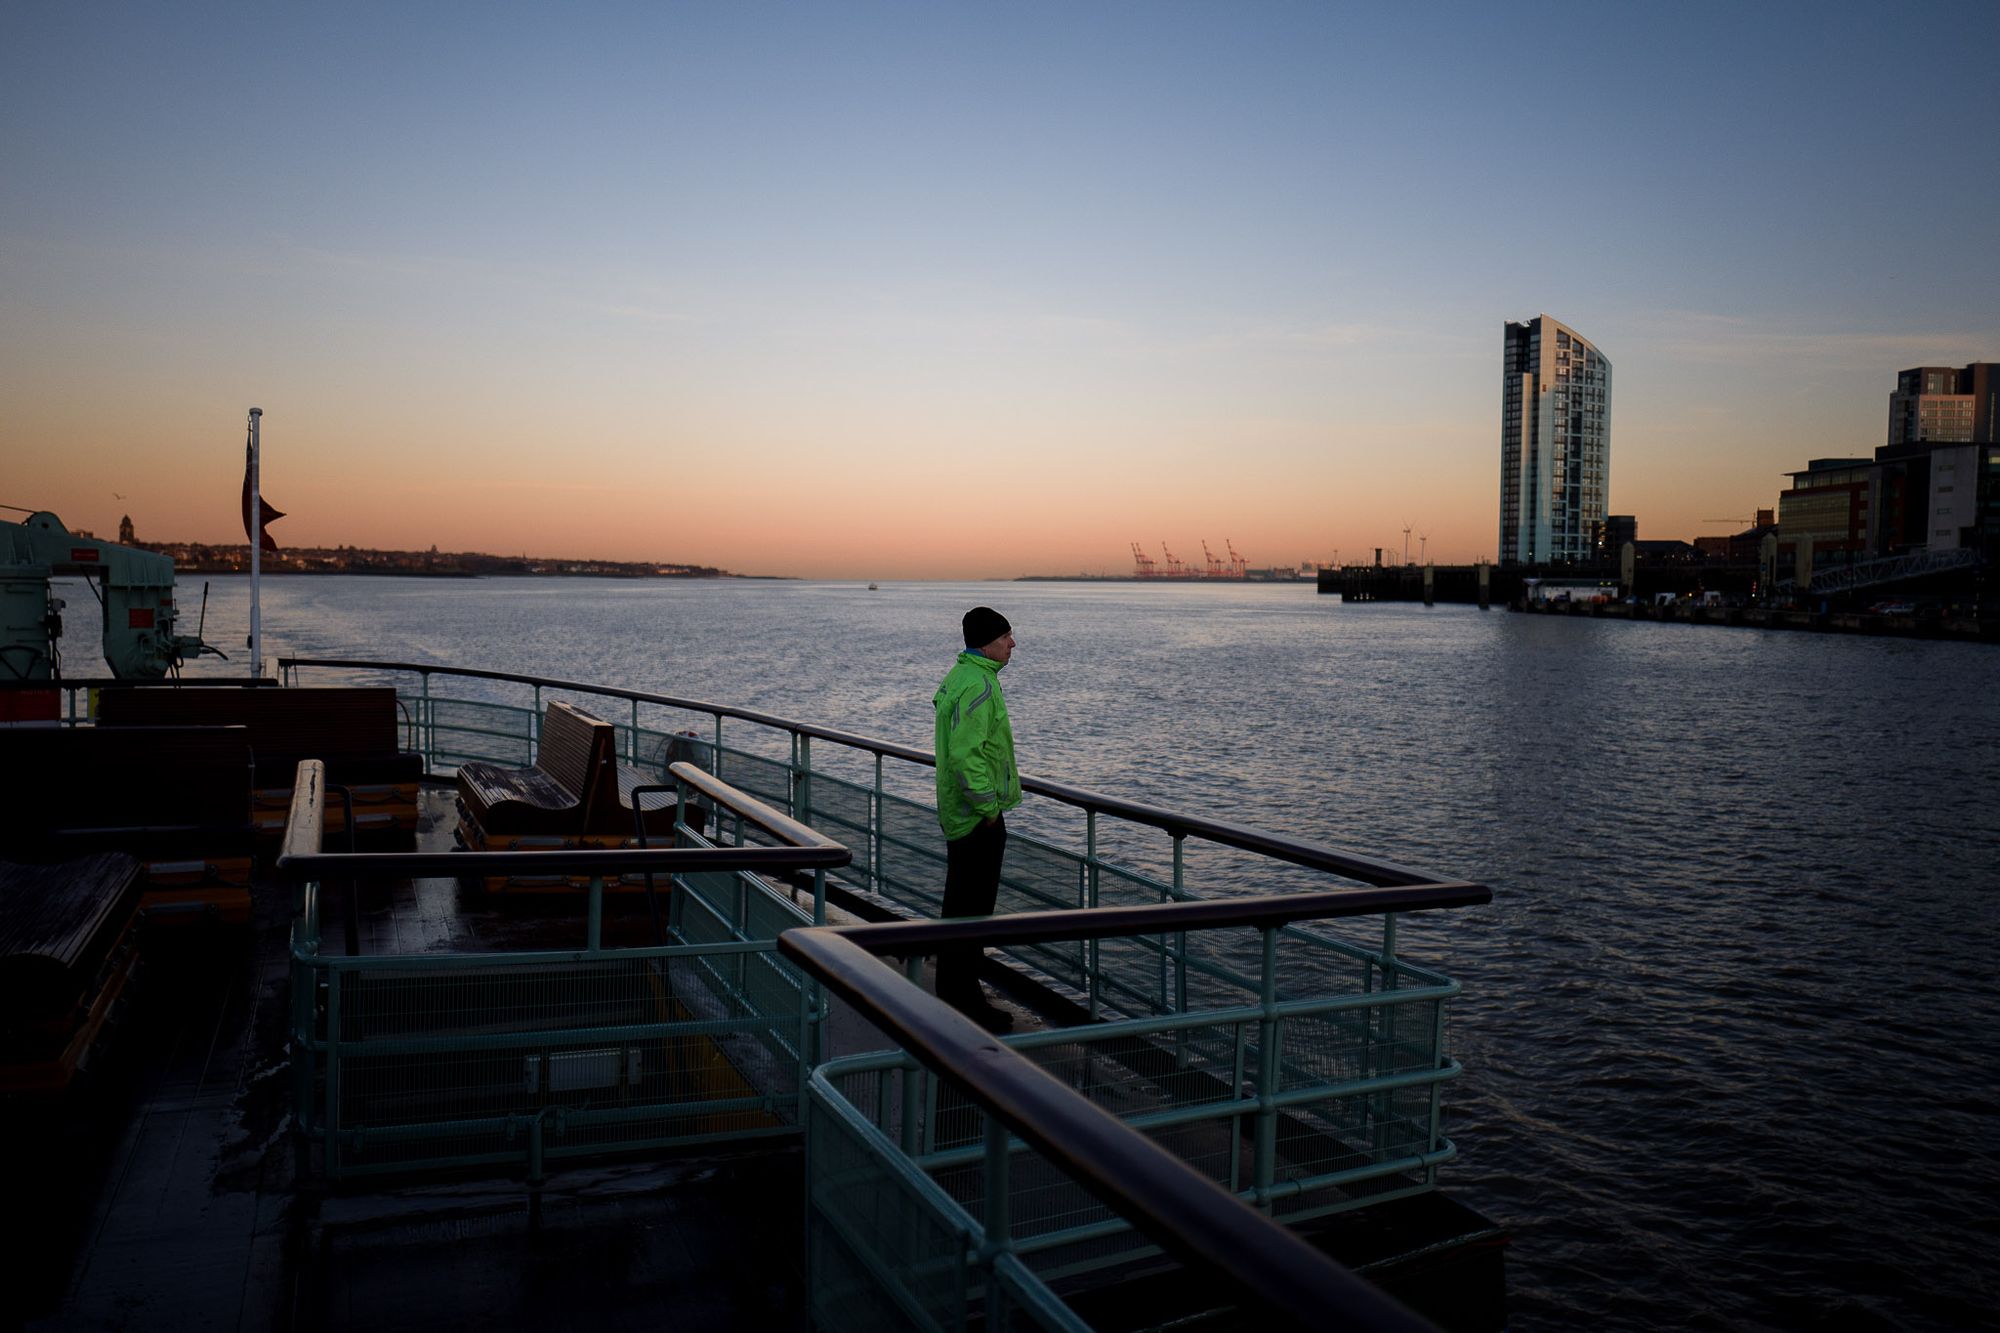 Sunrise across the River Mersey from the Mersey Ferry.